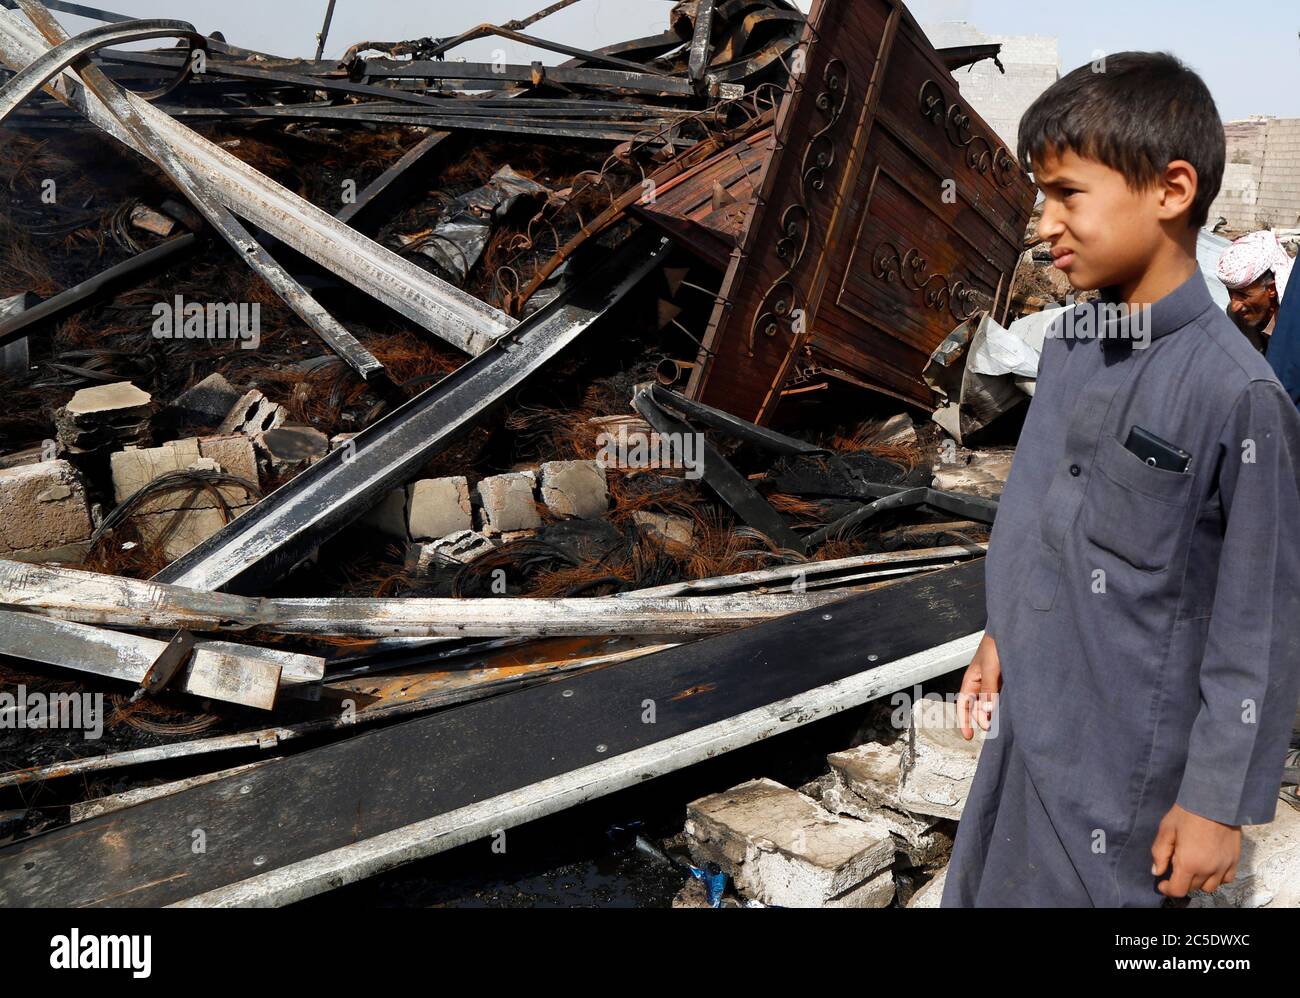 Sanaa, Yemen. 2nd July, 2020. A boy looks at a warehouse after it was hit by airstrikes in Sanaa, Yemen, on July 2, 2020. The Saudi-led coalition on Wednesday launched a series of airstrikes on the Yemeni capital Sanaa, which is under Houthi control, the Houthi-run al-Masirah TV reported. Credit: Mohammed Mohammed/Xinhua/Alamy Live News Stock Photo